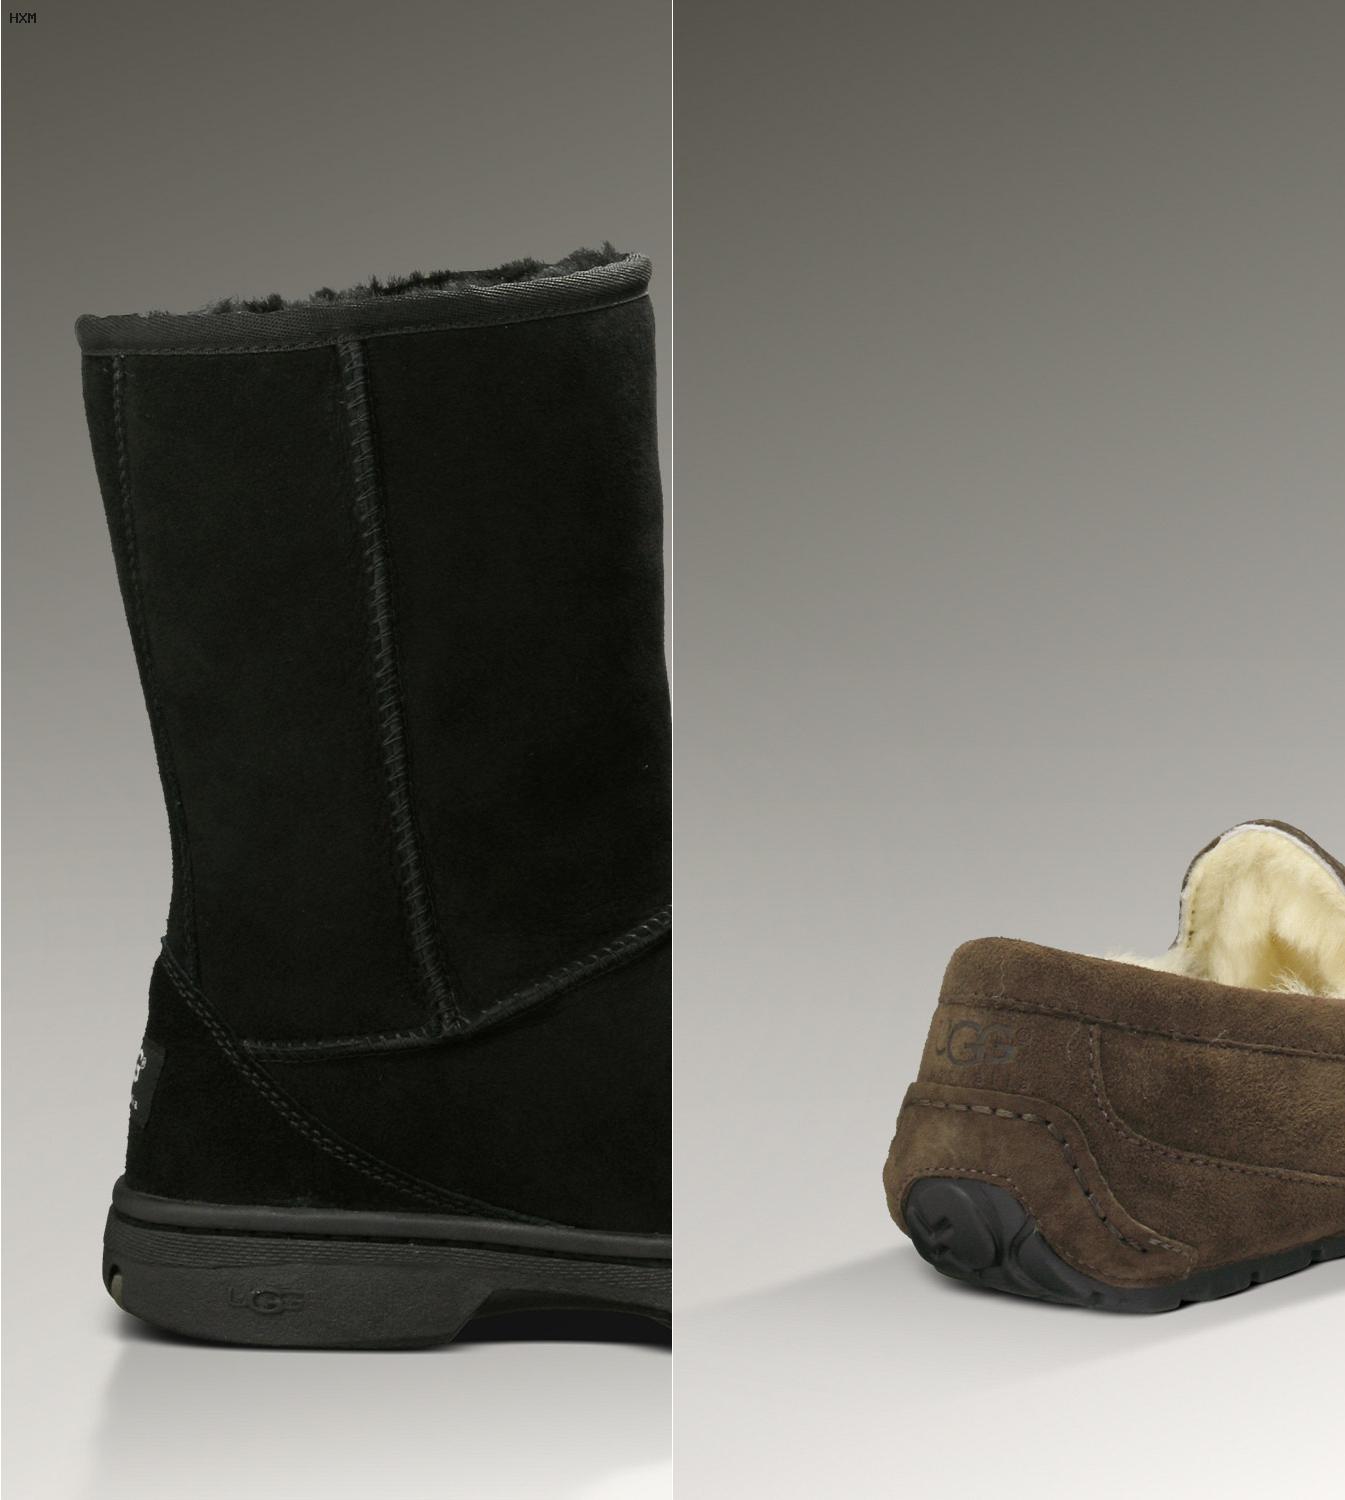 ugg outlet factory opiniones